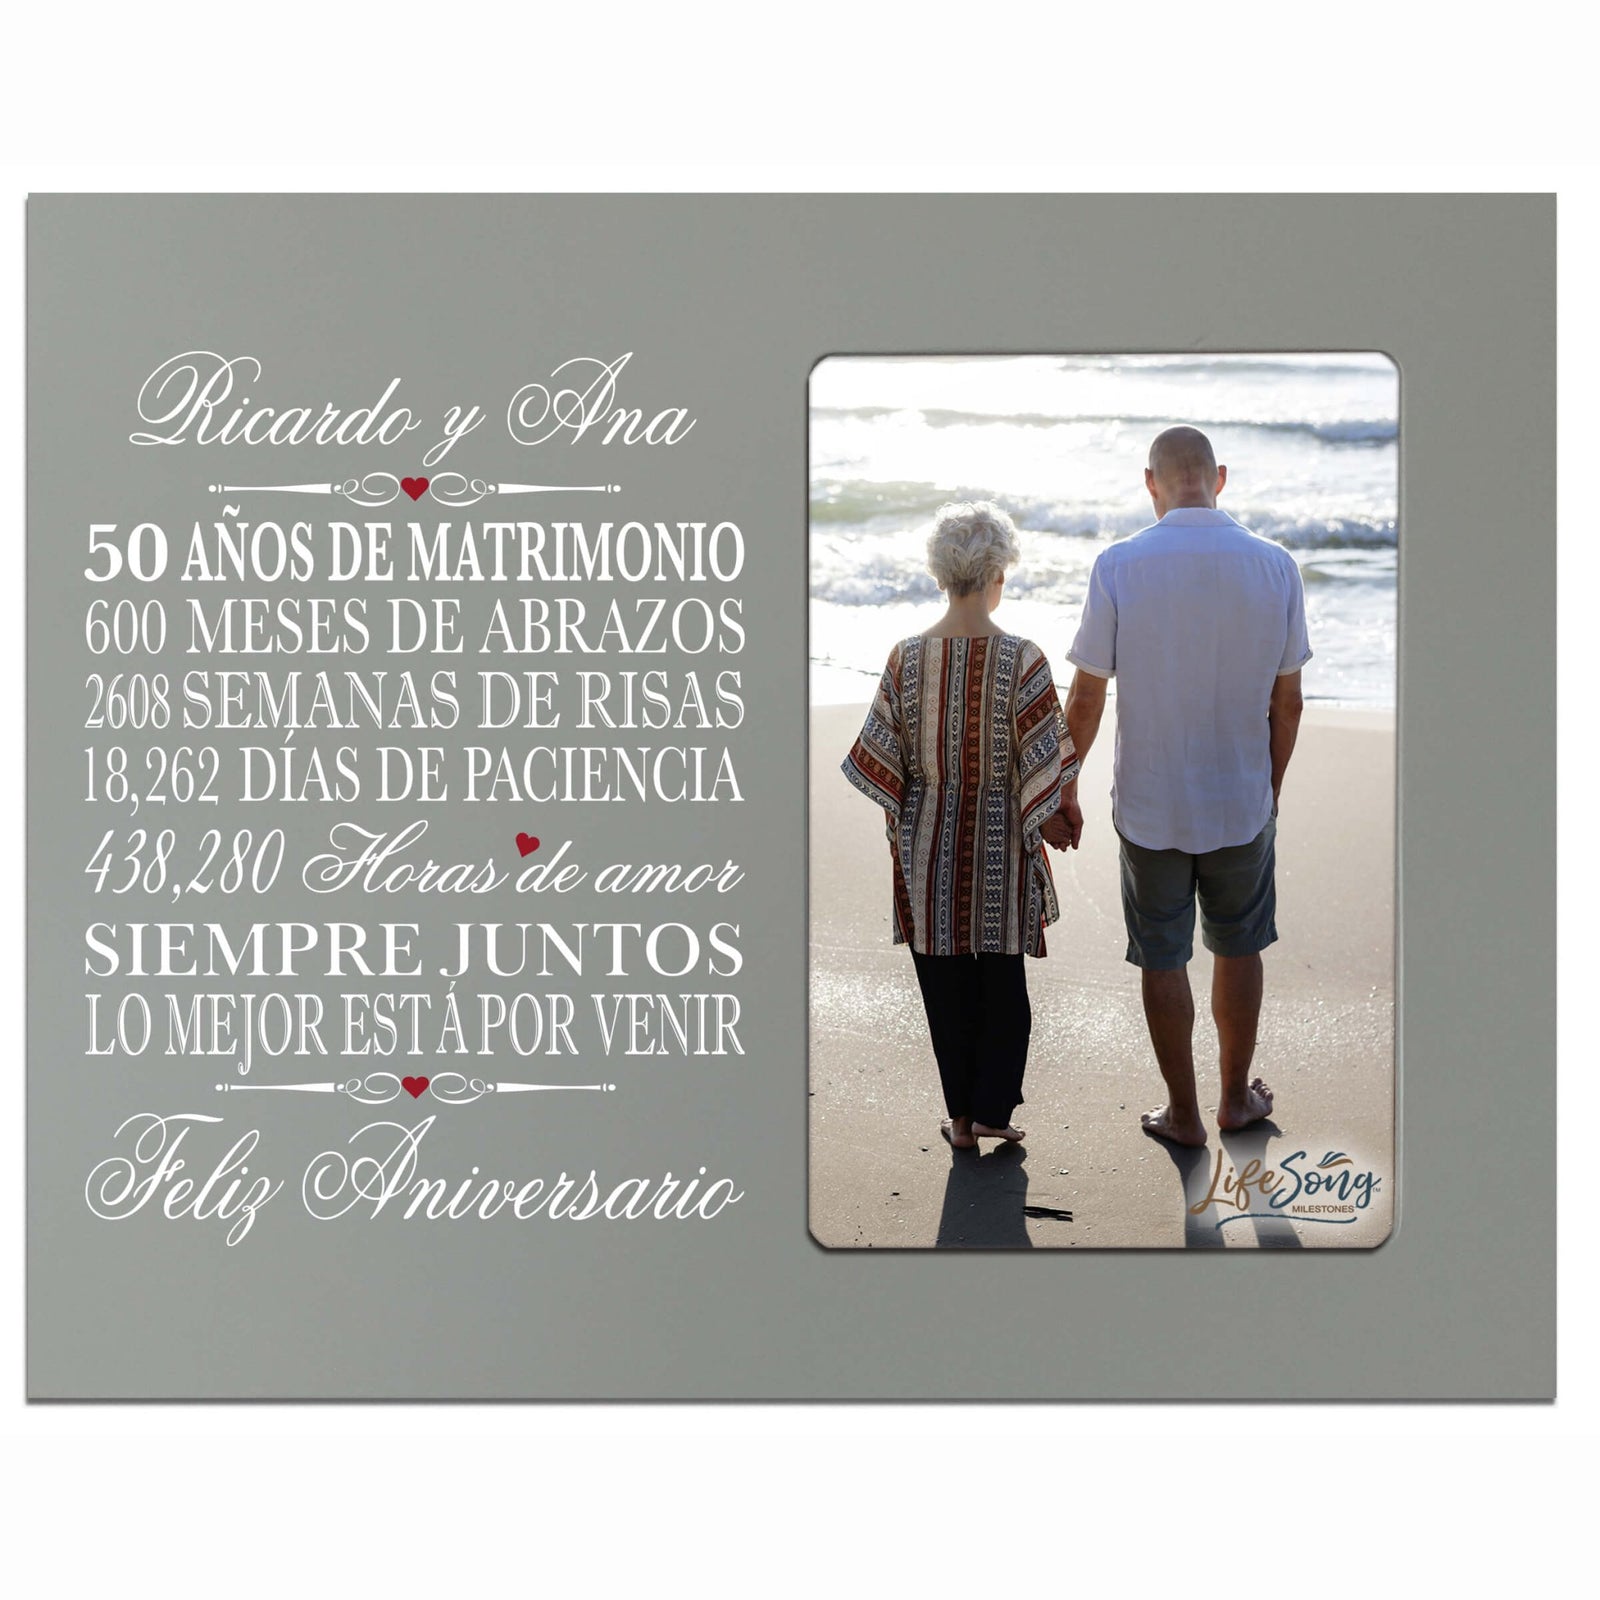 Lifesong Milestones Couples 25th Wedding Anniversary Spanish Picture Frame Gift Ideas